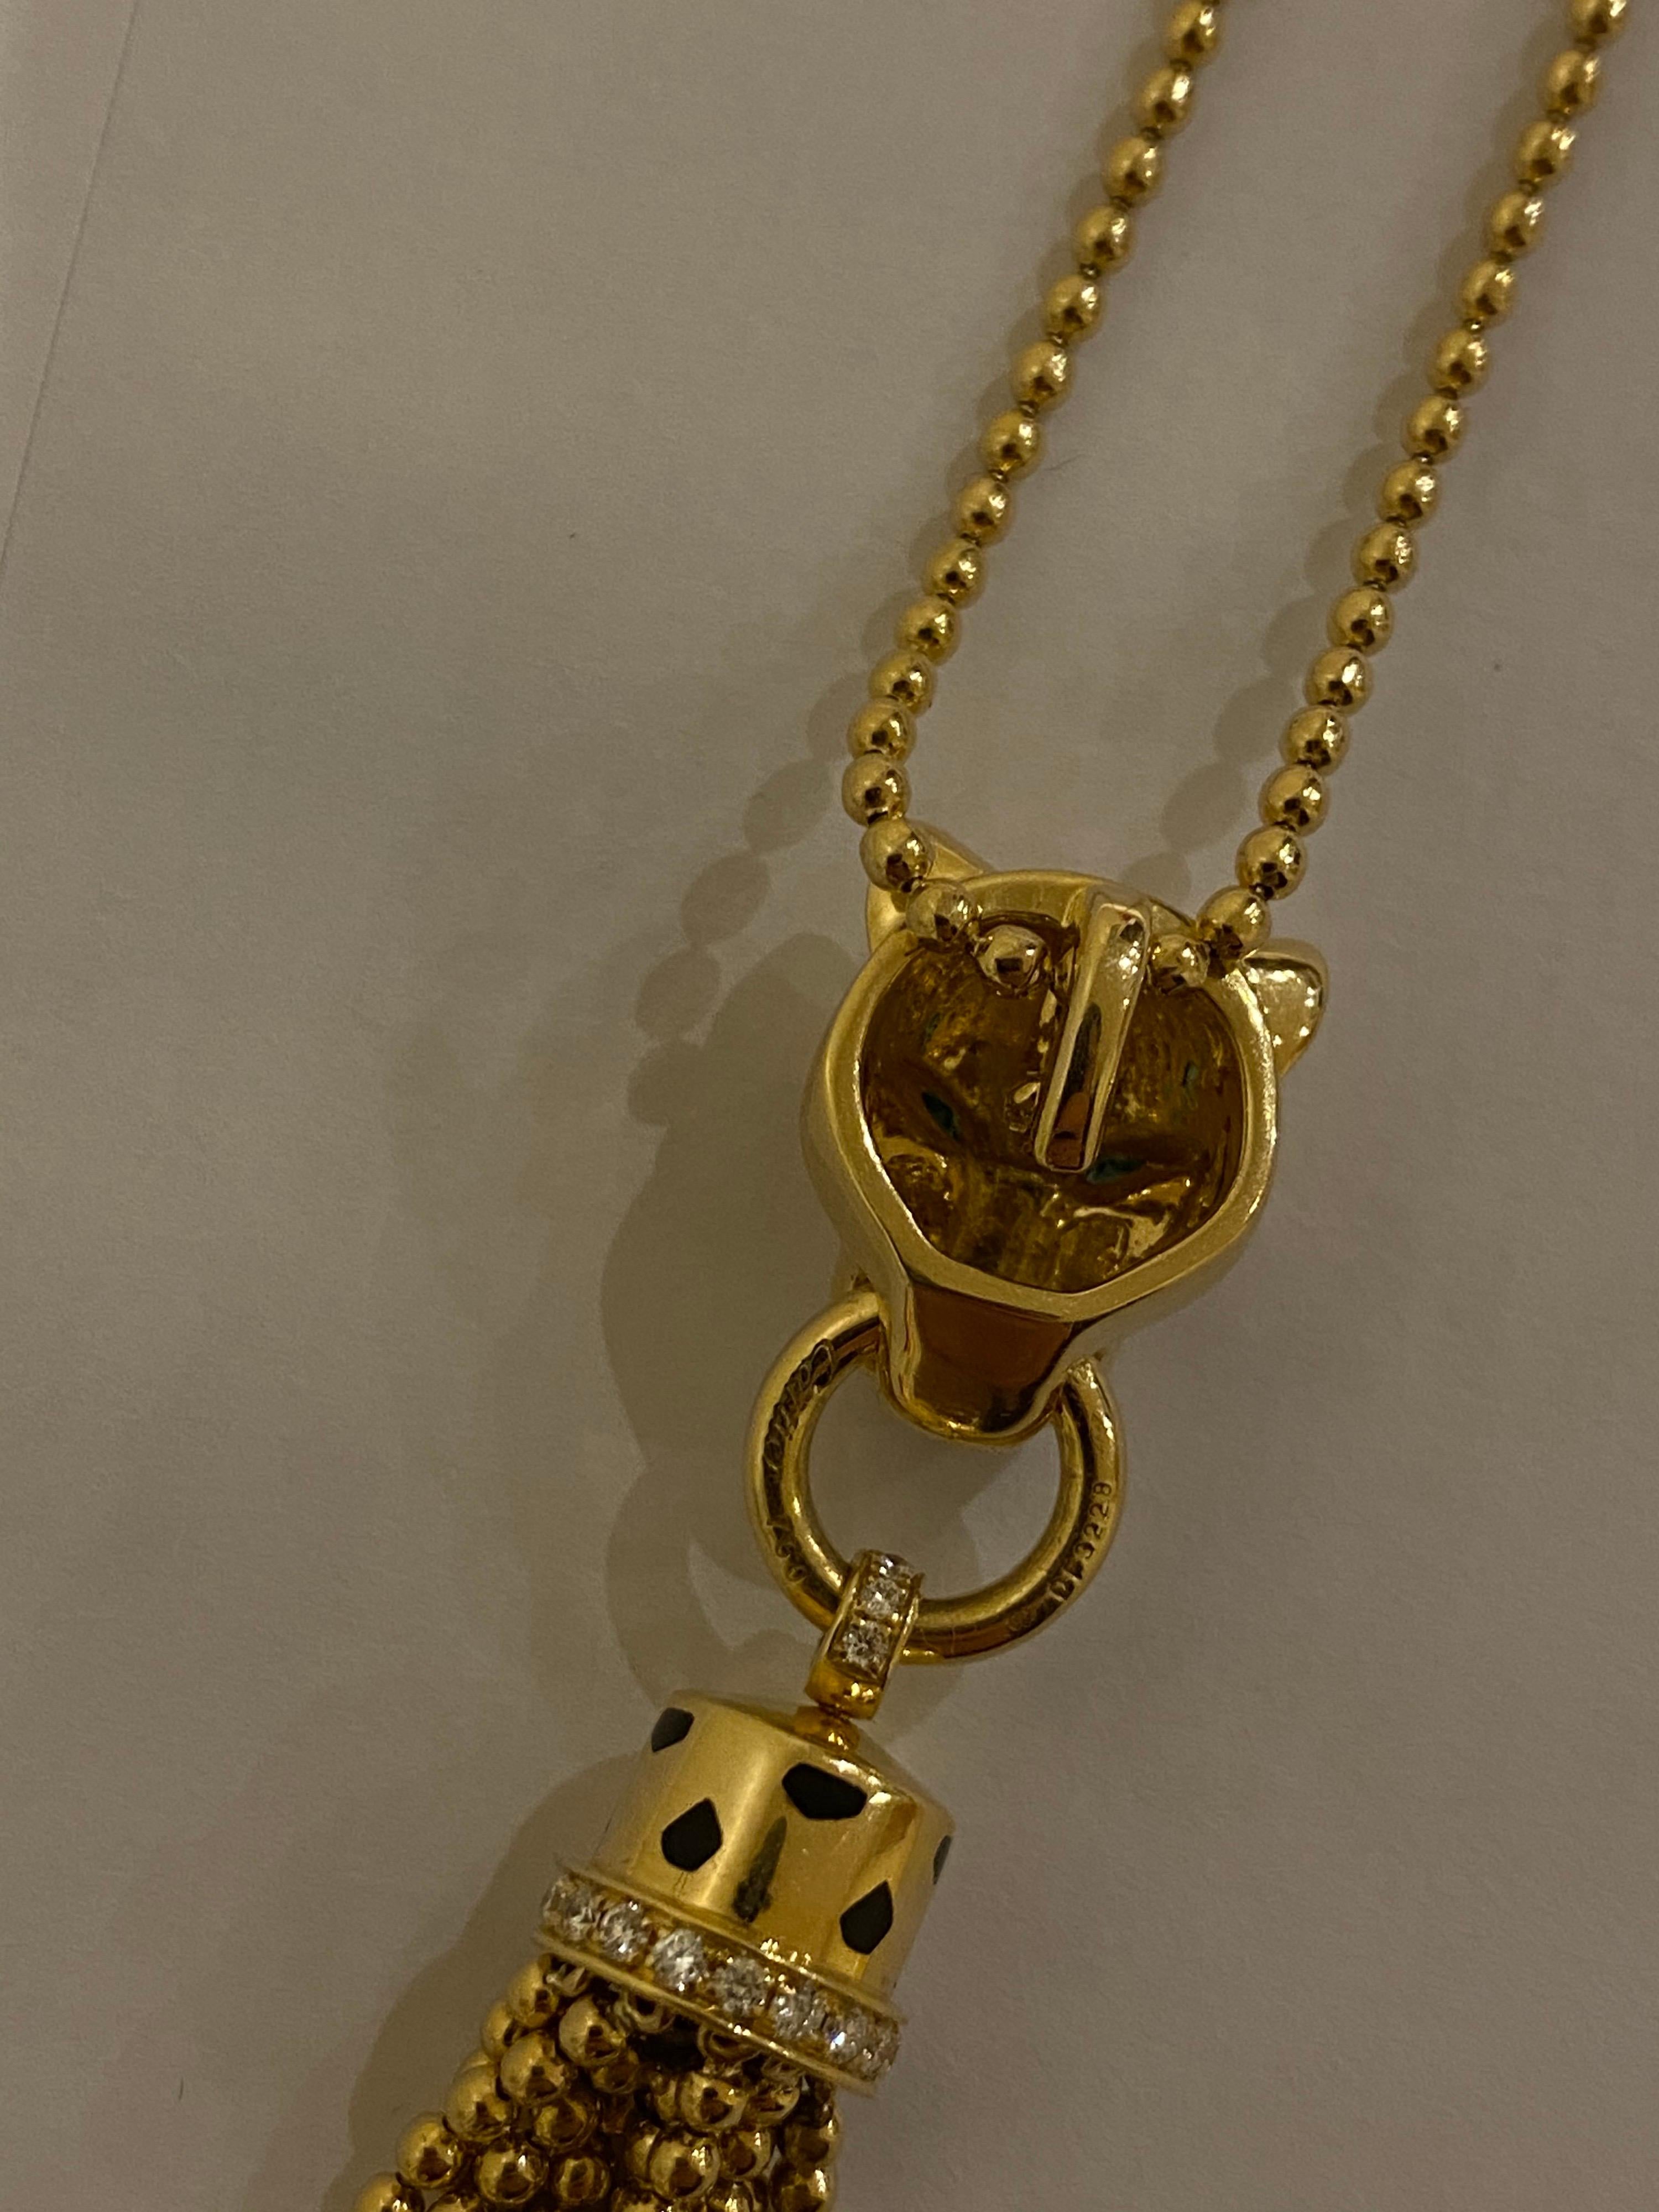 Modern Cartier Contemporary Panthere Panther Diamond Pendant Necklace Yellow Gold 2000s